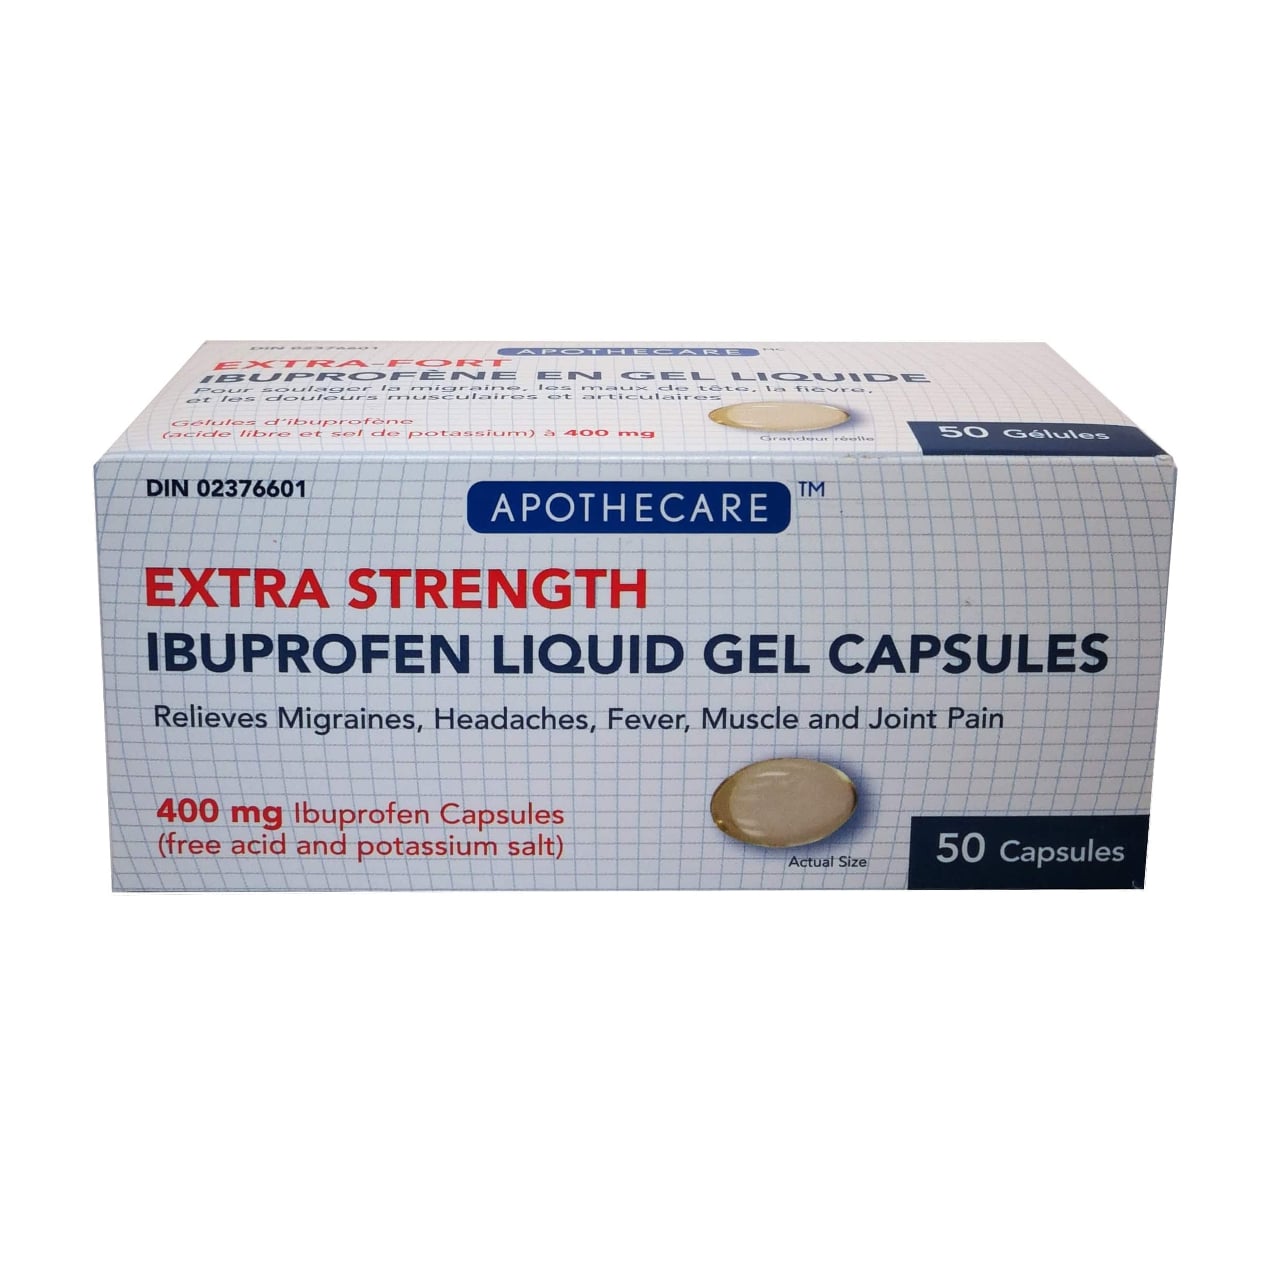 Product package for Apothecare Extra Strength Ibuprofen 400mg Gel Caps in English